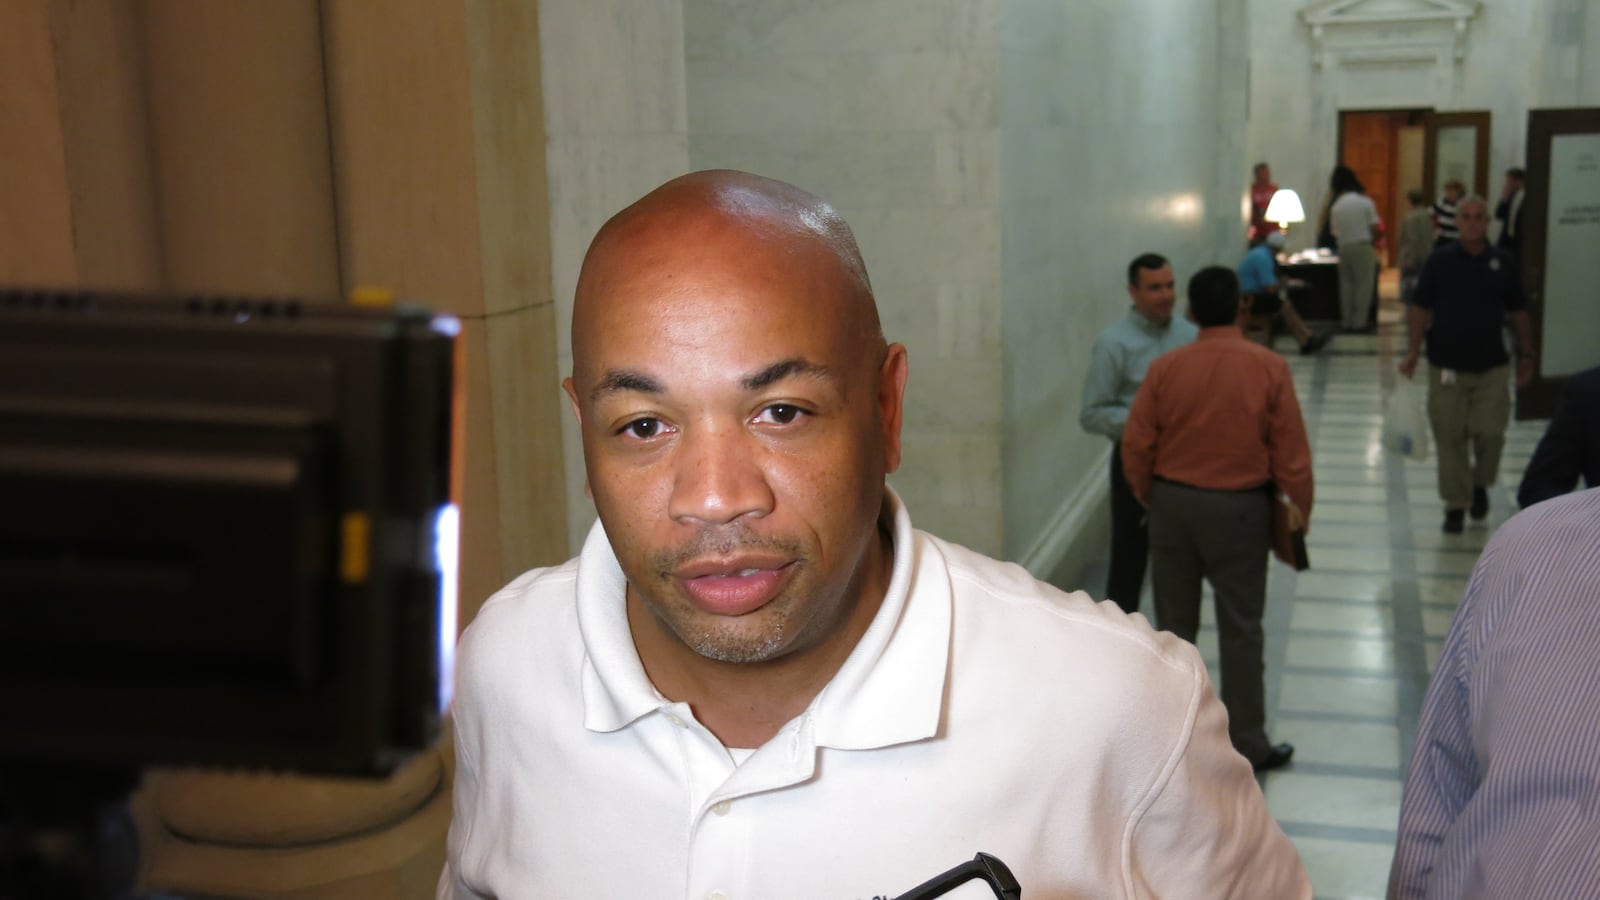 Speaker Carl Heastie, after meeting with Assembly Democrats in 2015.